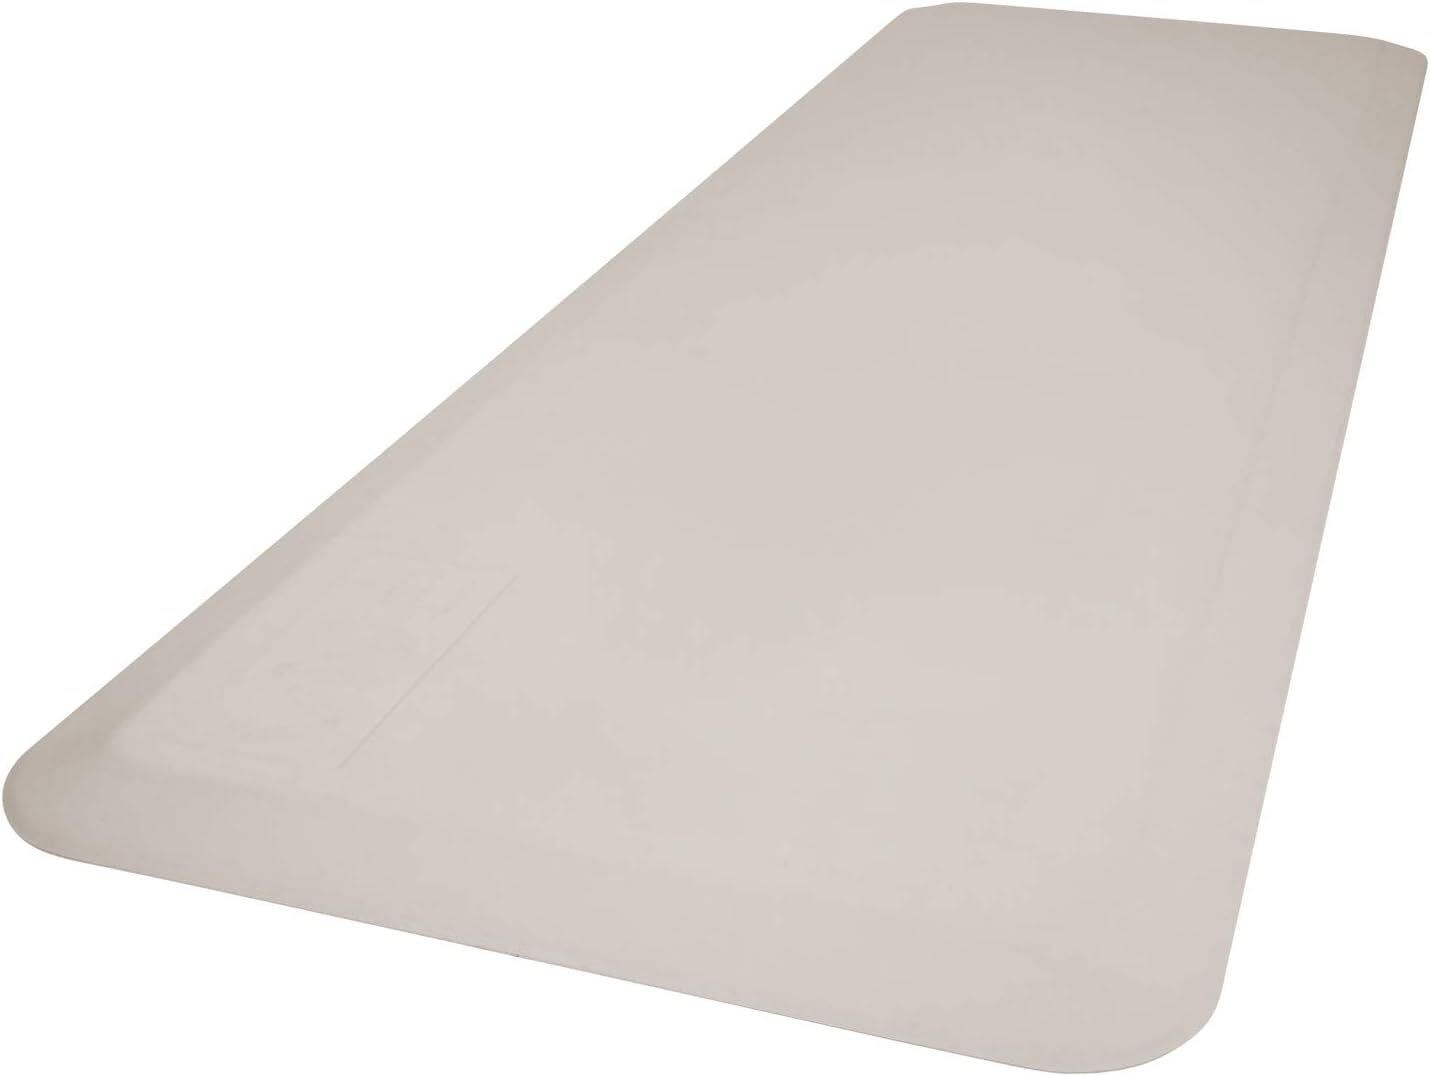 $120  Vive Fall Mat - 72 x 24 Bedside Fall Safety